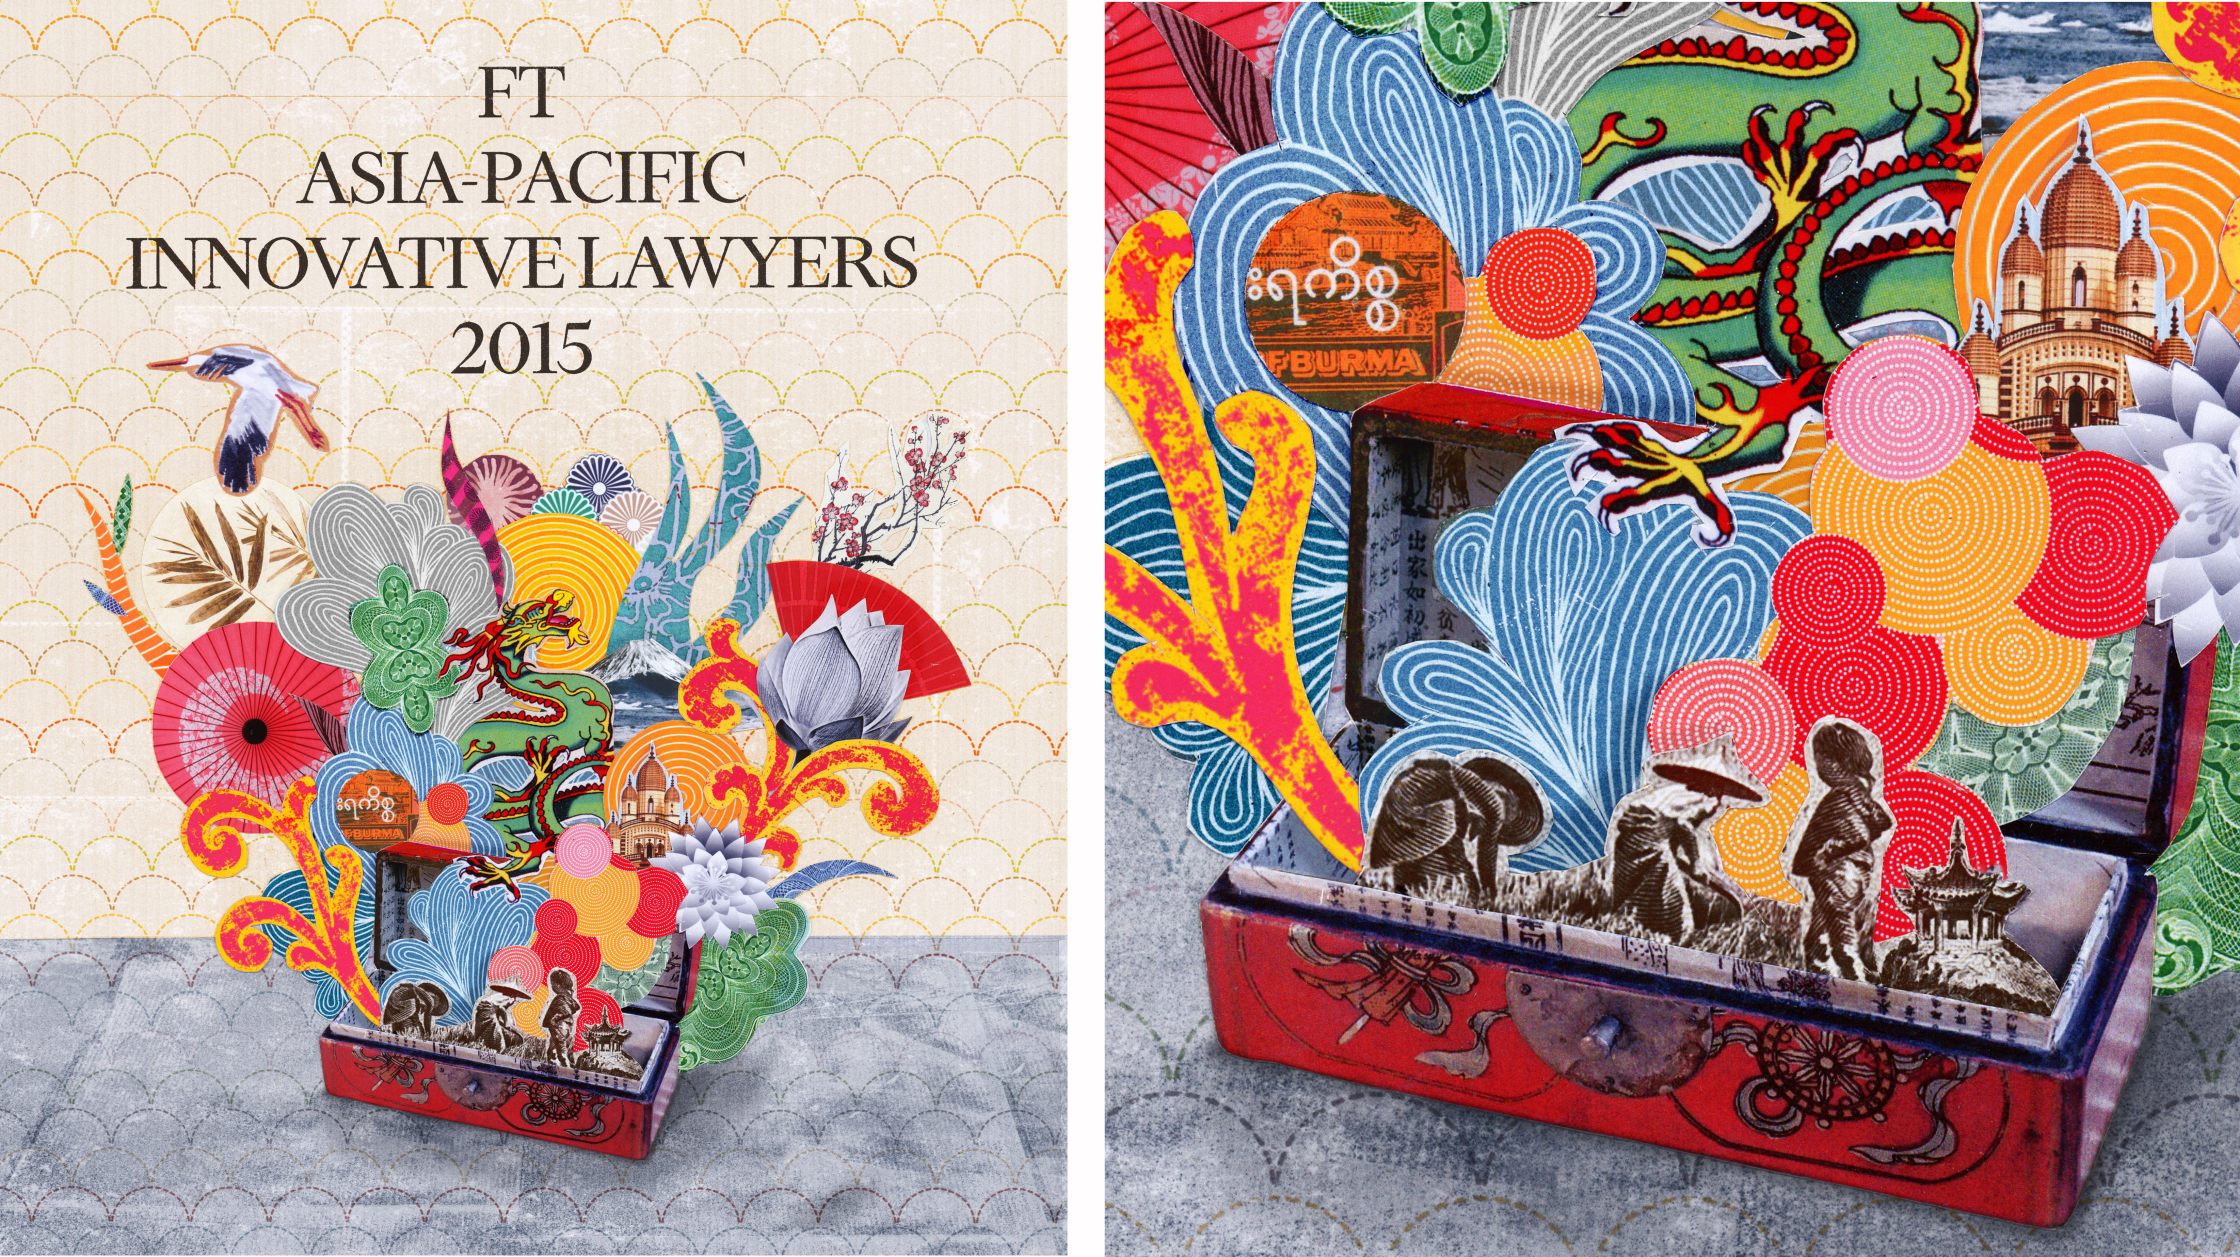 Asia Pacific Innovative Lawyers Report FT